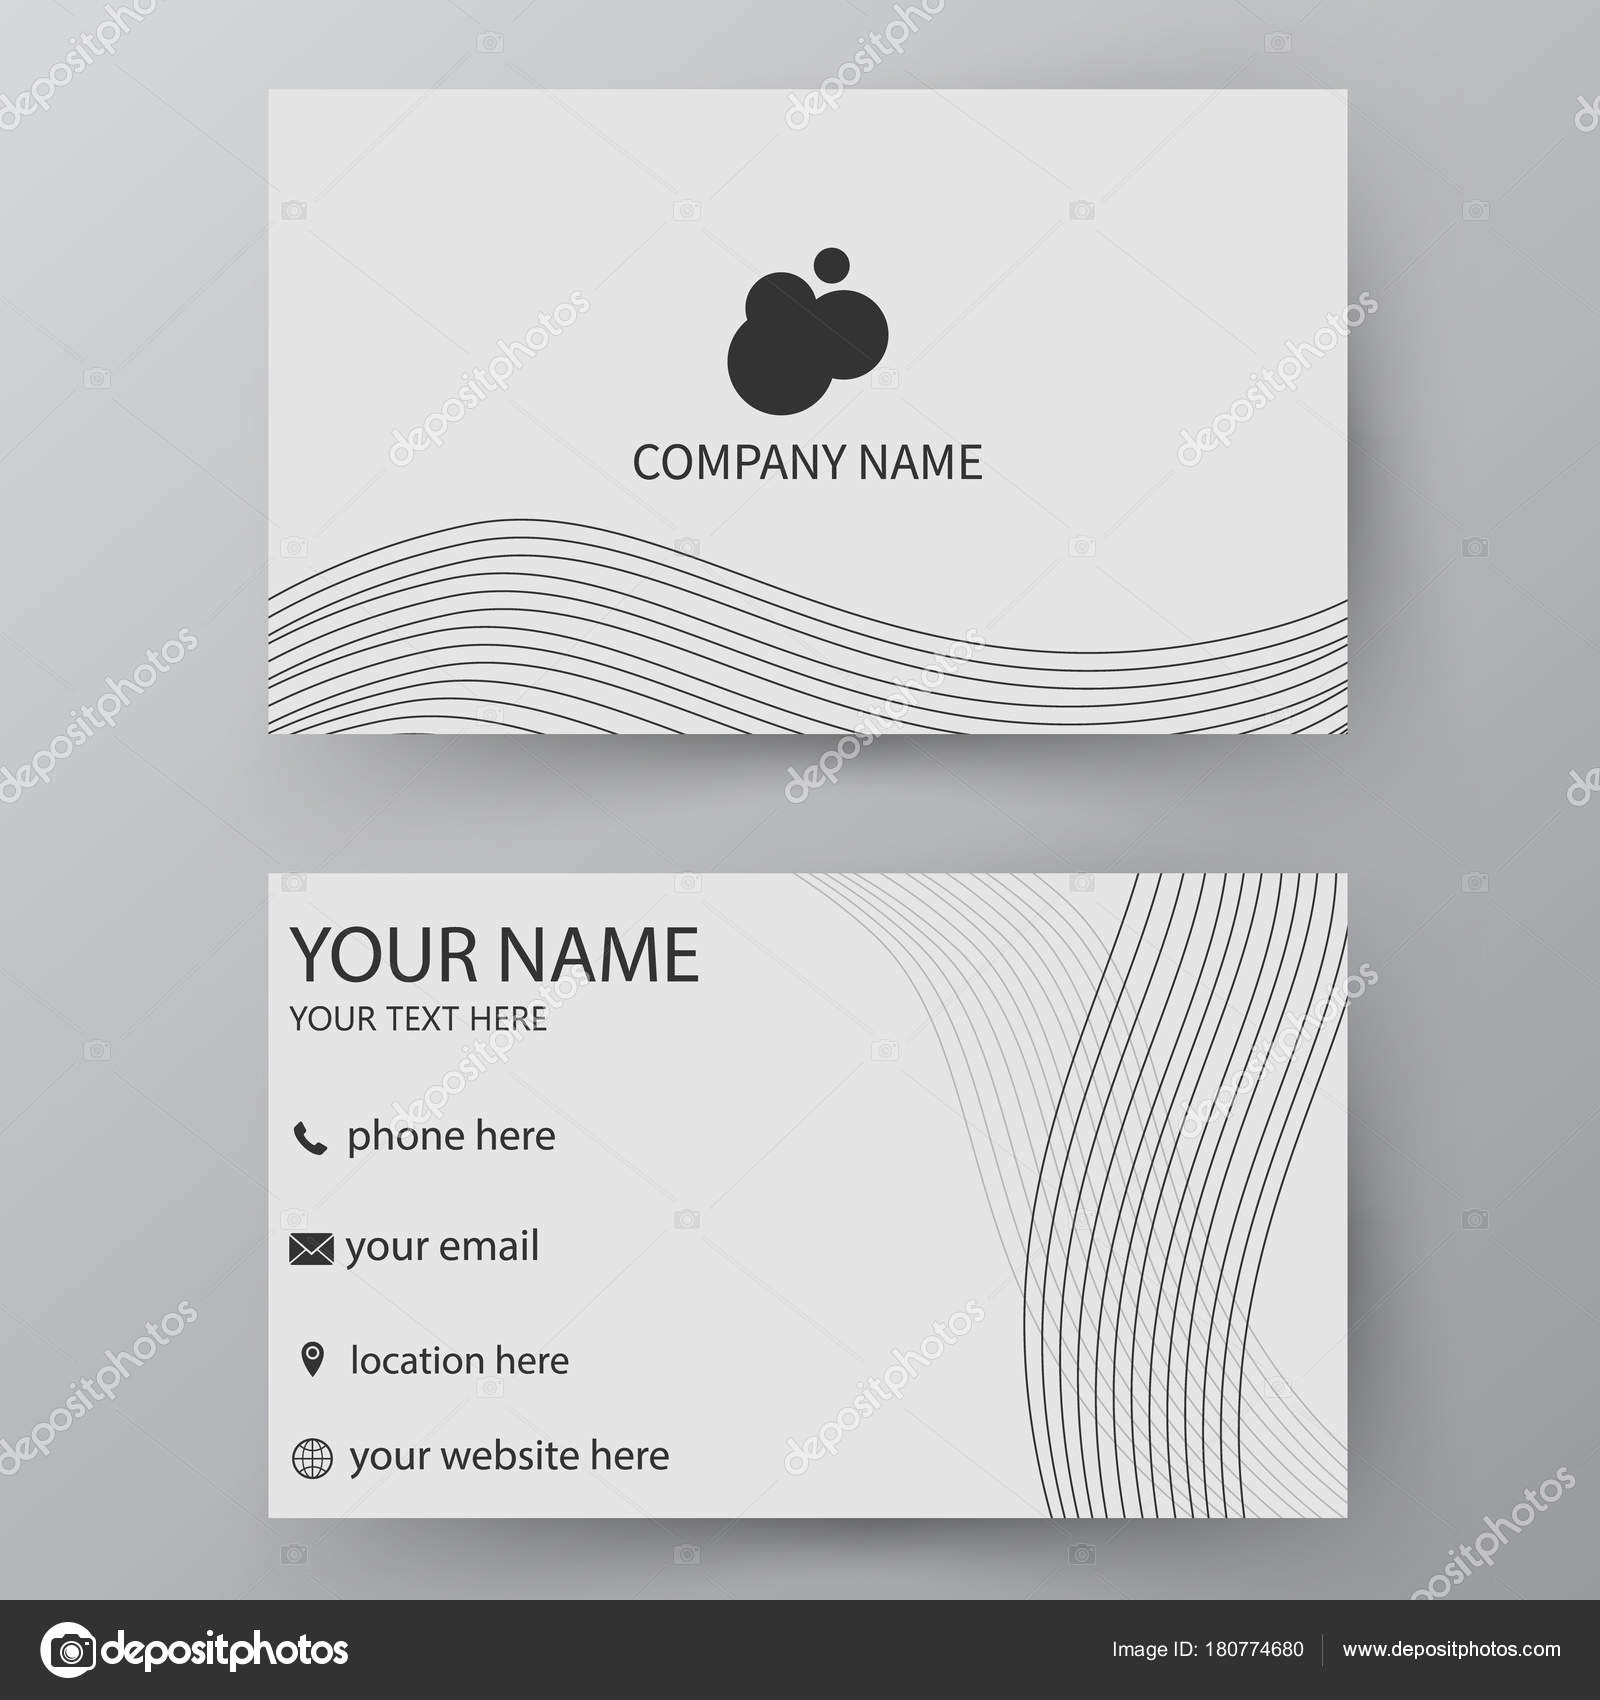 Business Card Template Adobe Psd Free Professional Word Of Apple Business Card Template